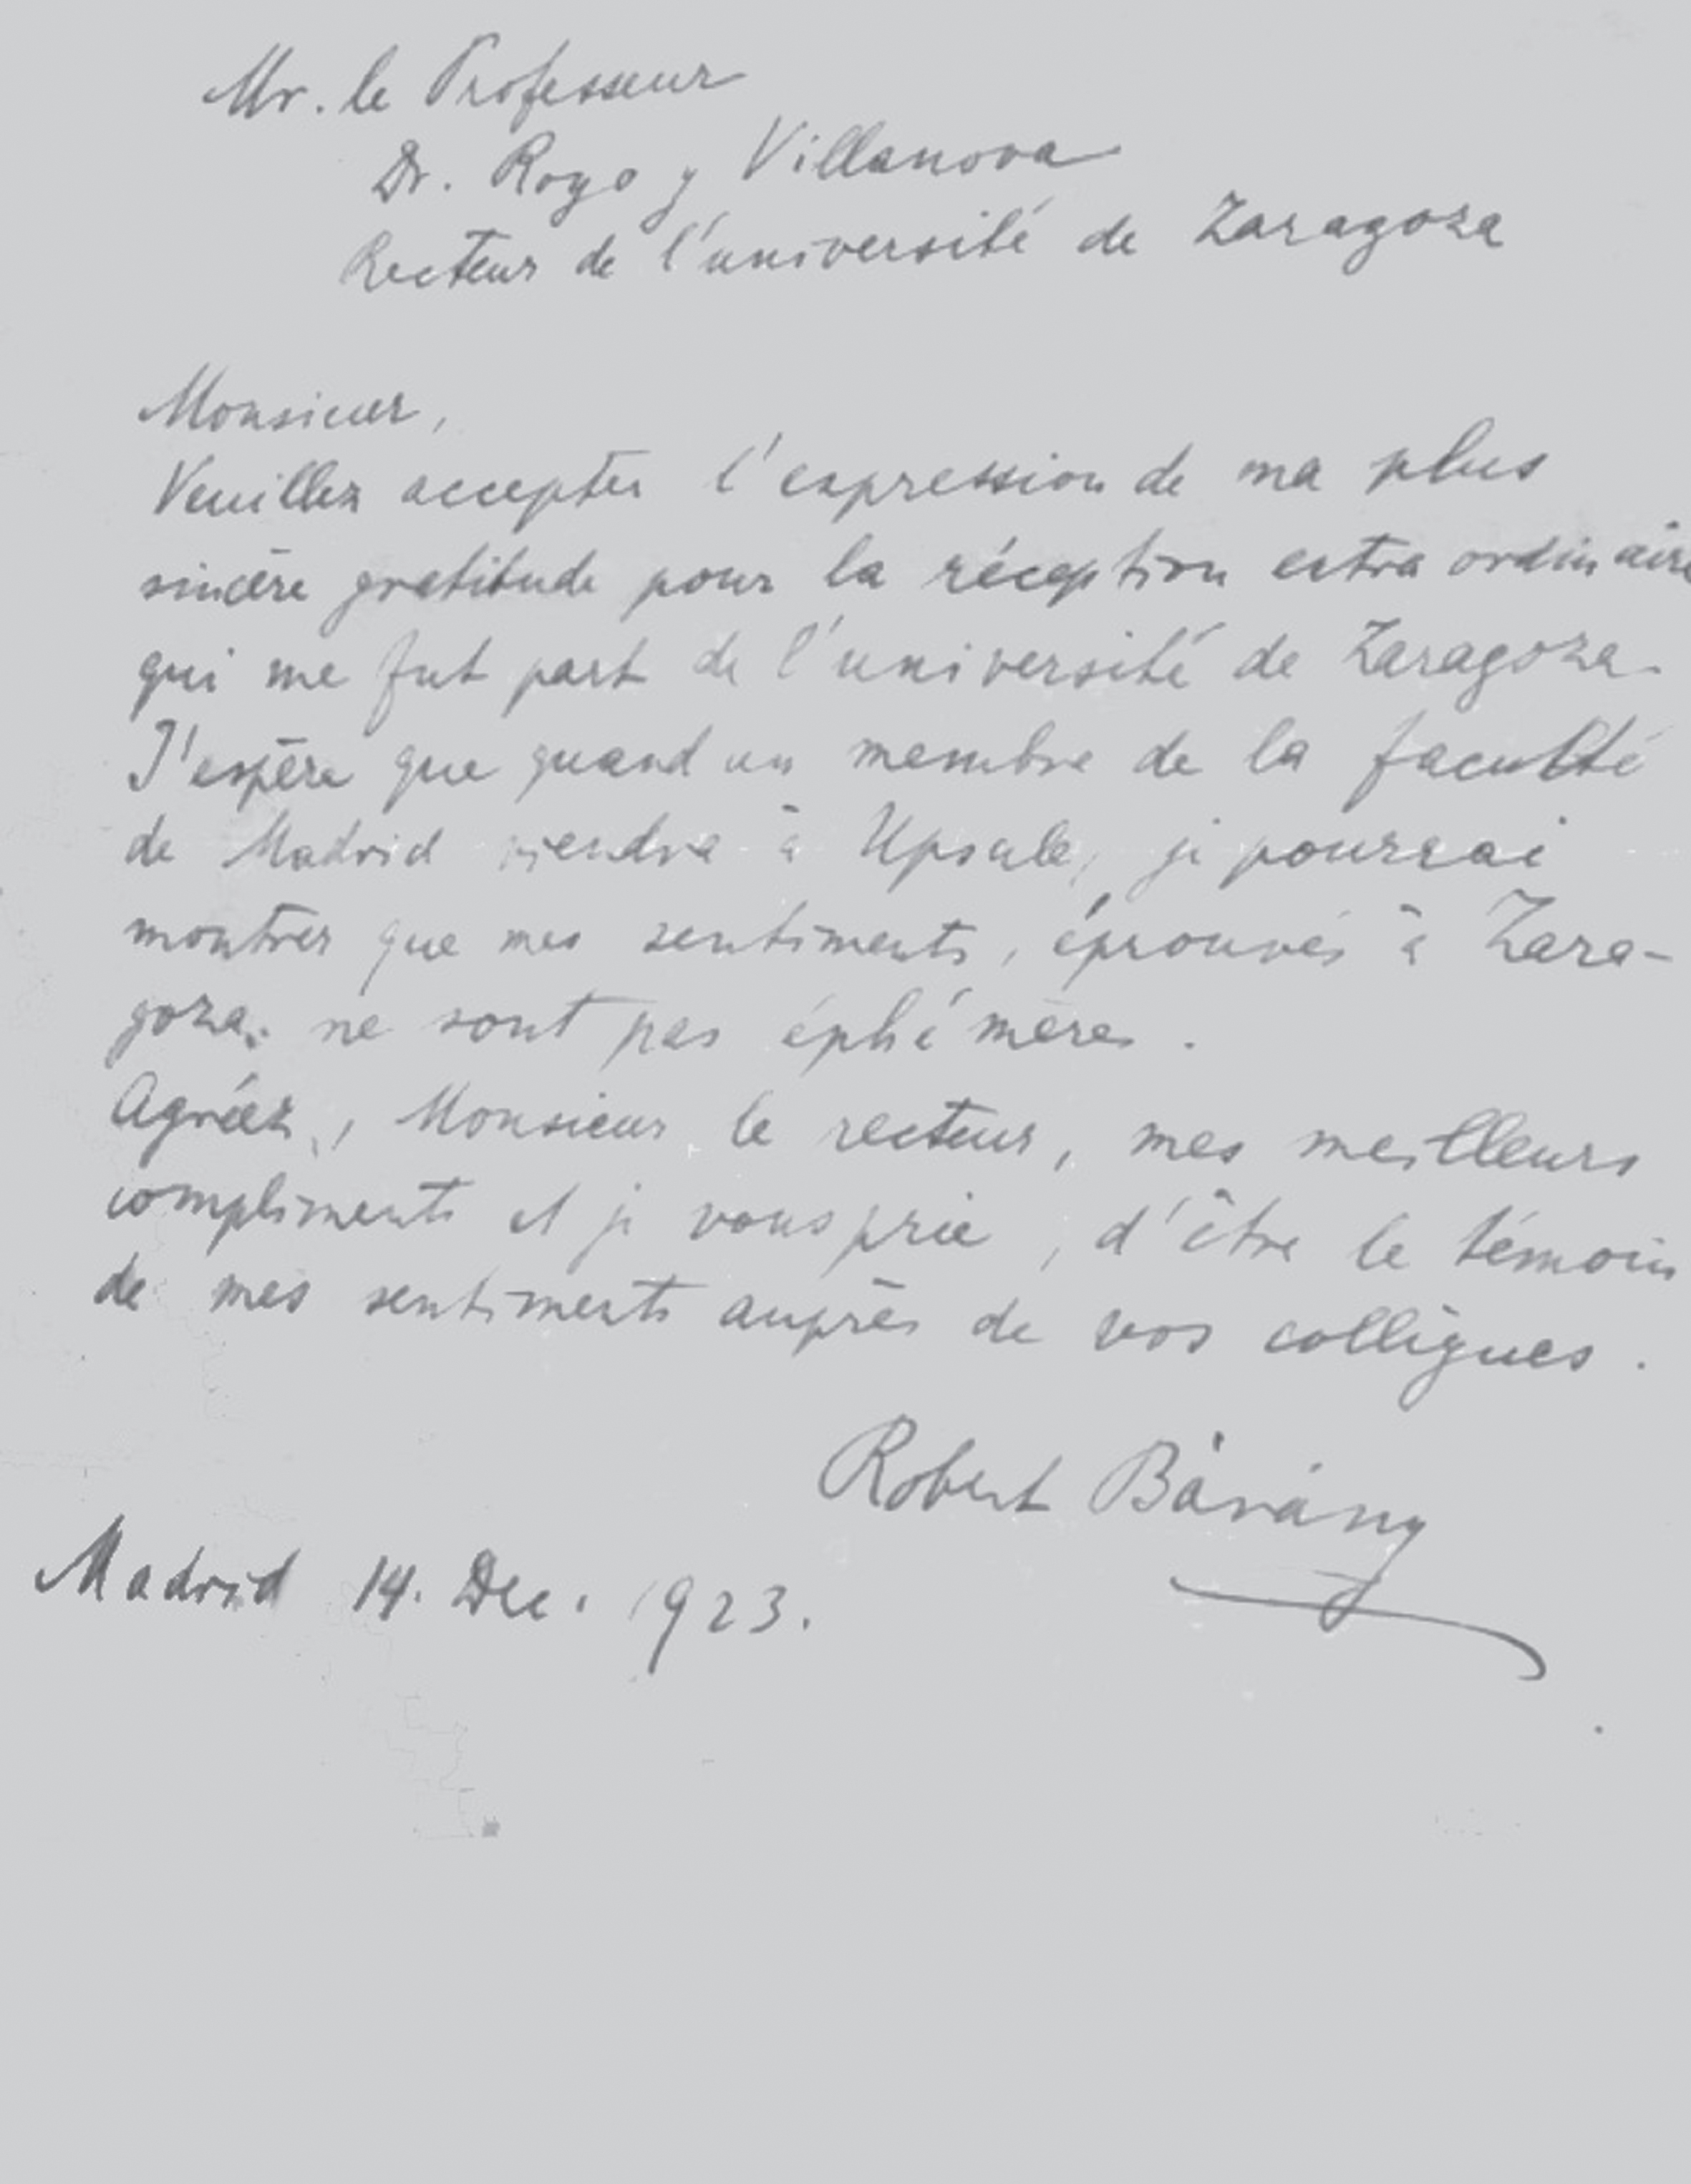 Letter of thanks from Dr. Bárány.